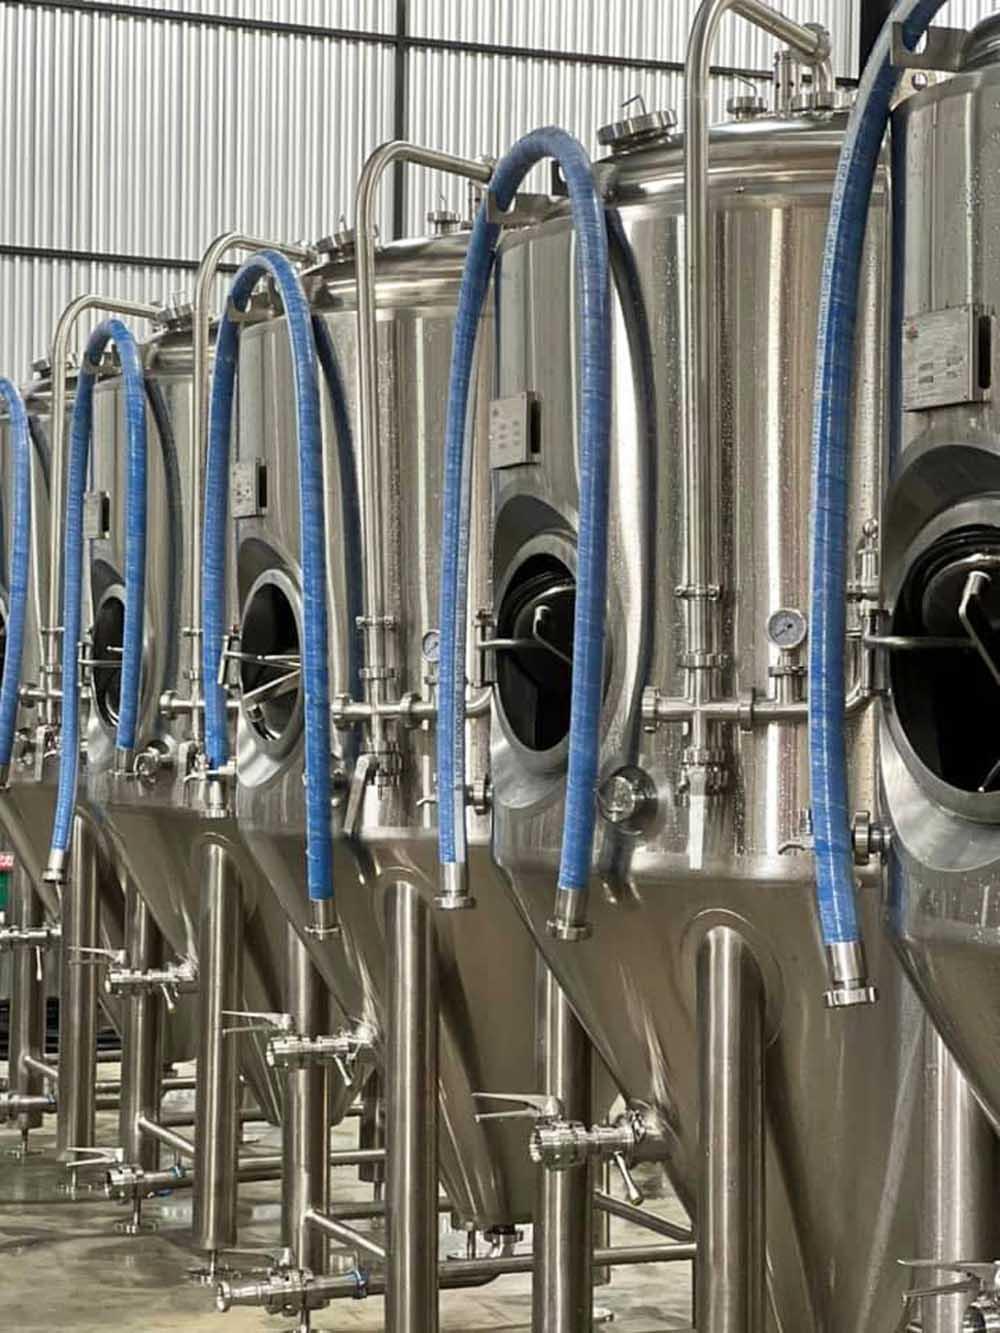 IOI Brewery in Indonesia_1000L brewery equipment by Tiantai